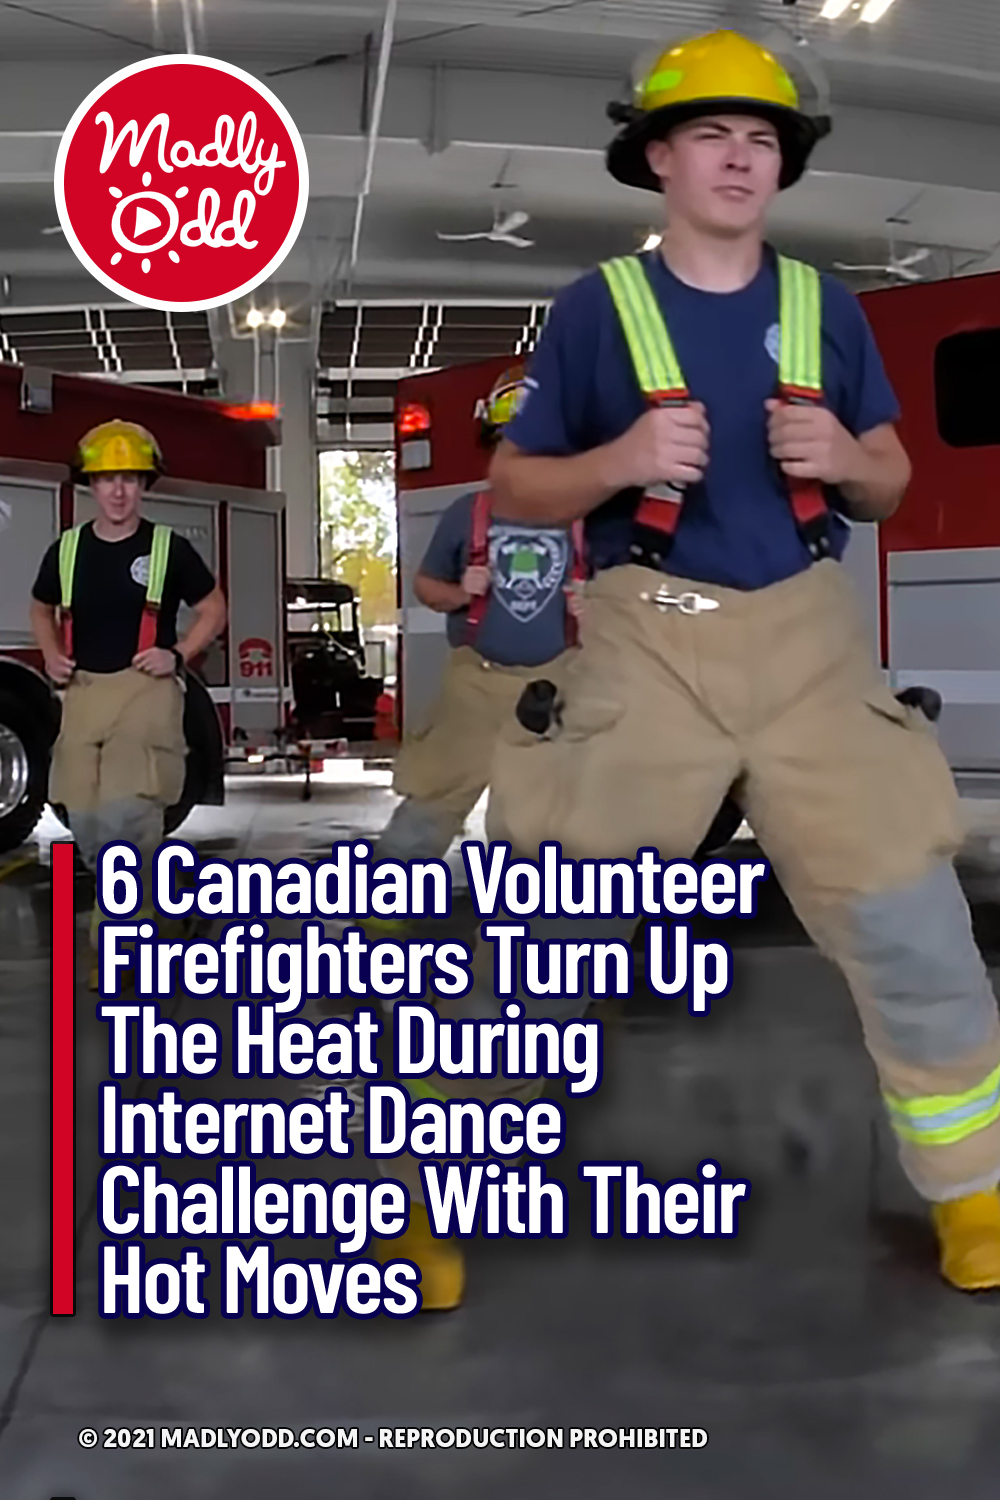 6 Canadian Volunteer Firefighters Turn Up The Heat During Internet Dance Challenge With Their Hot Moves